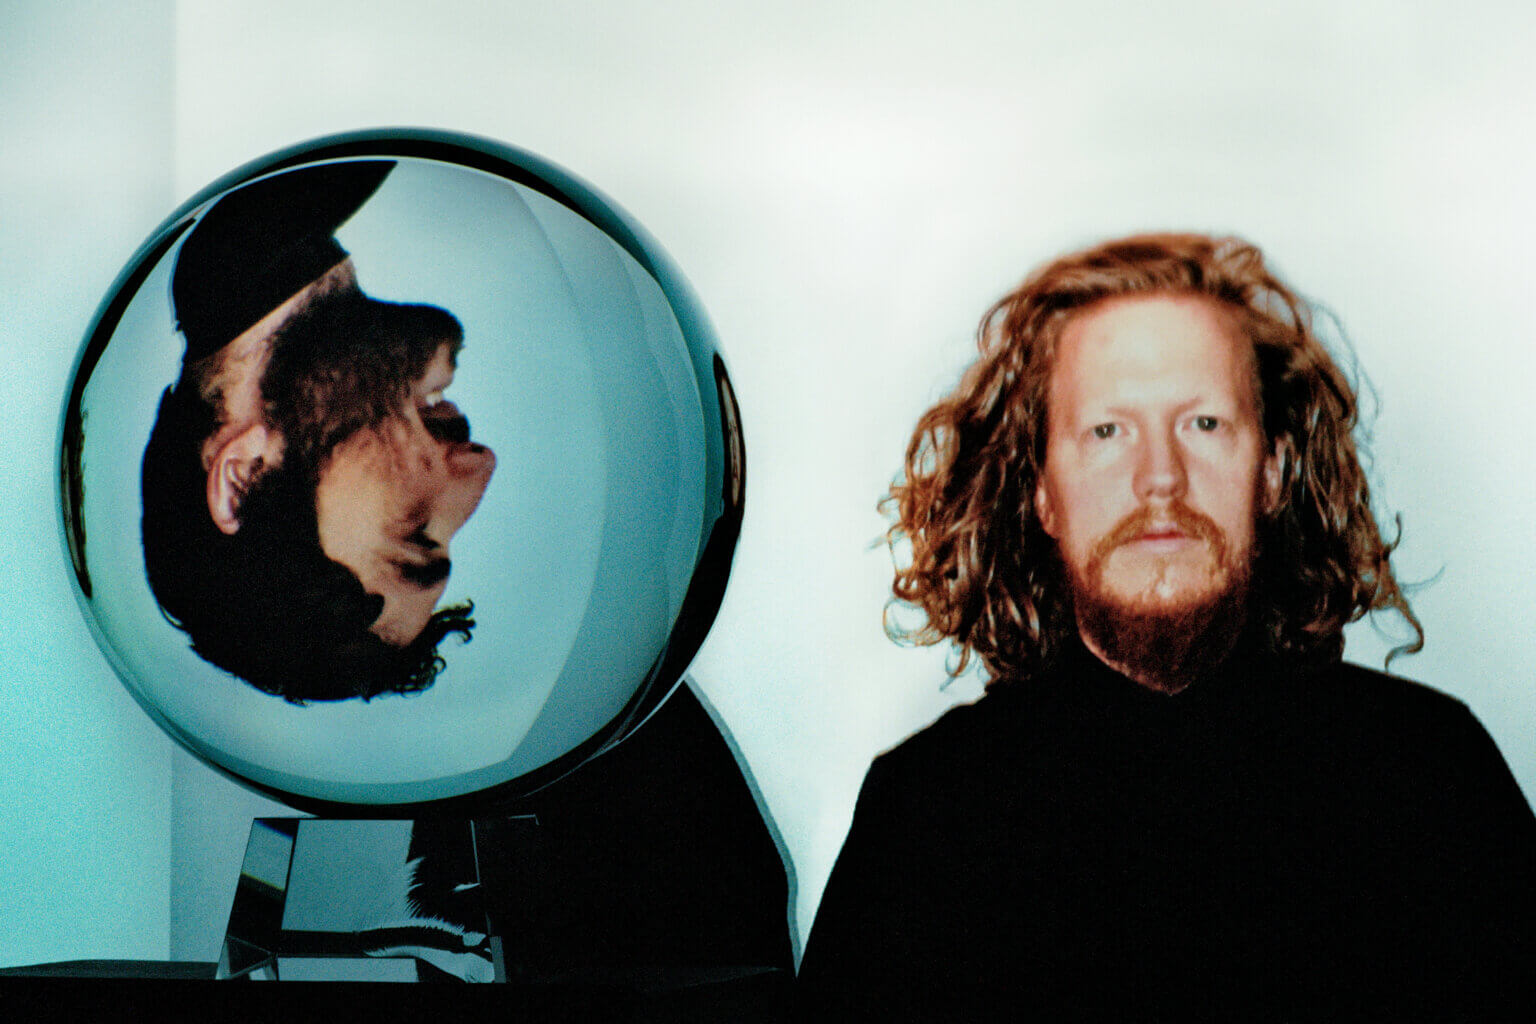 Darkside have announced their new album Spiral, will be released on July 23, via Matador Records. Today they have shared the single The Limit